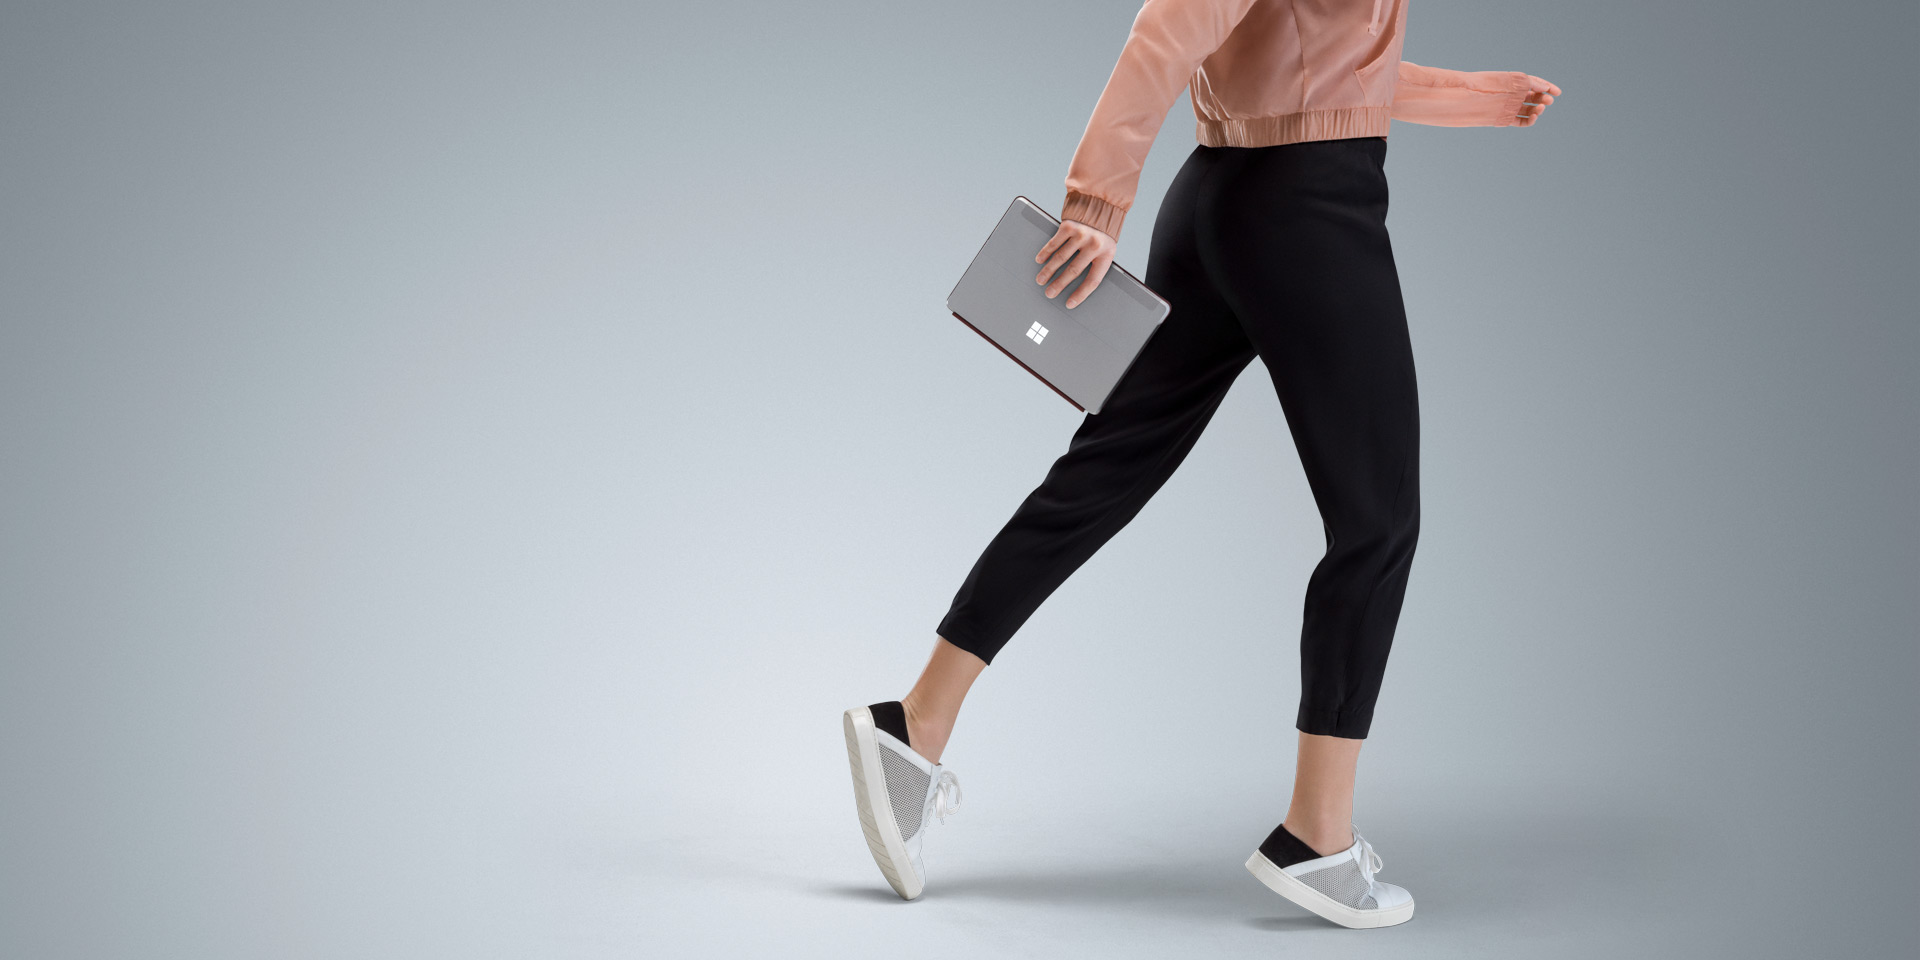 Surface Go in a woman’s hand as she walks